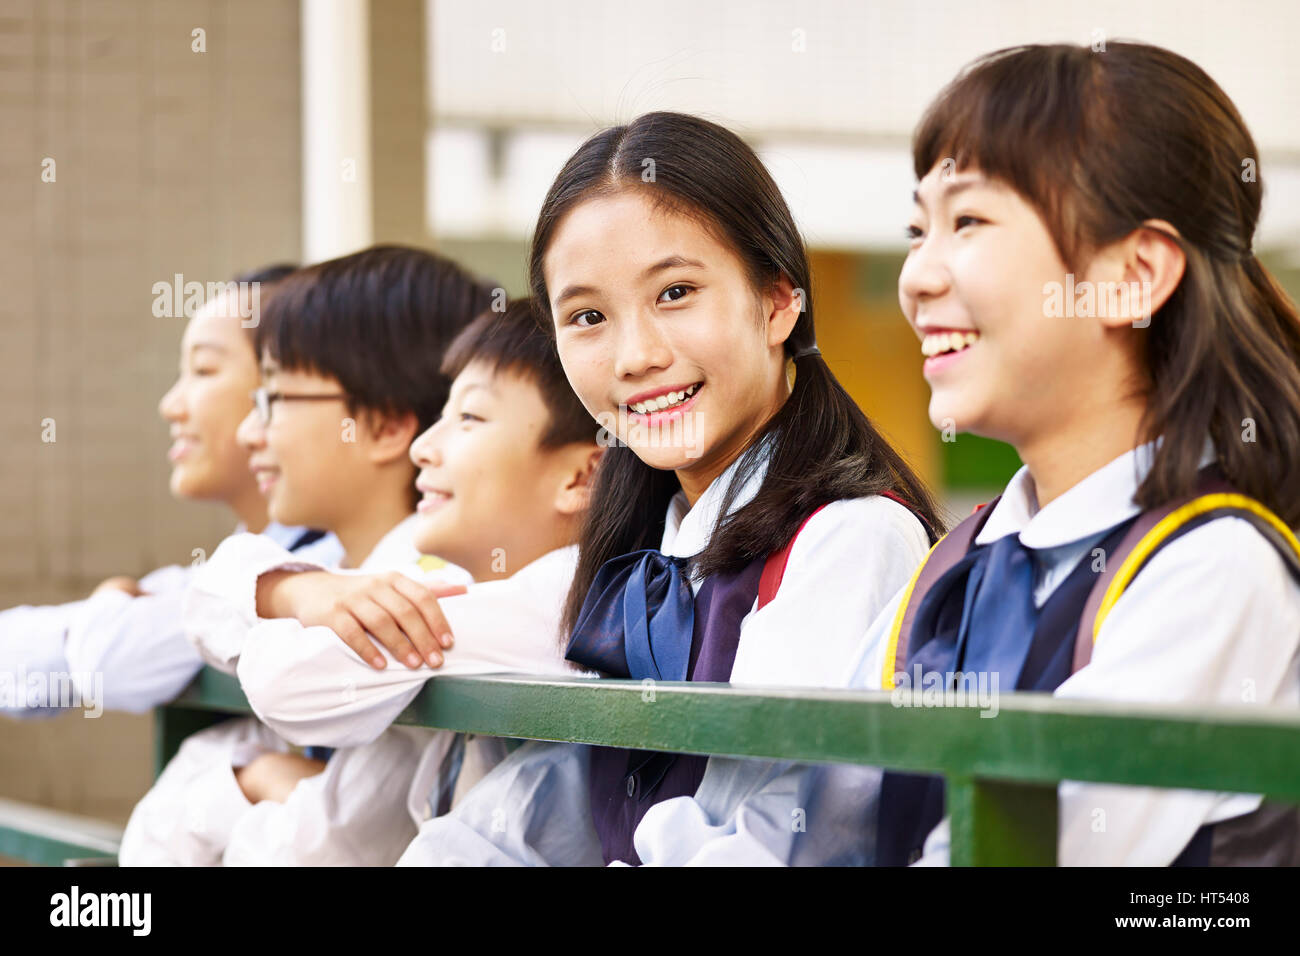 group of asian elementary school children with one schoolgirl looking at camera smiling. Stock Photo